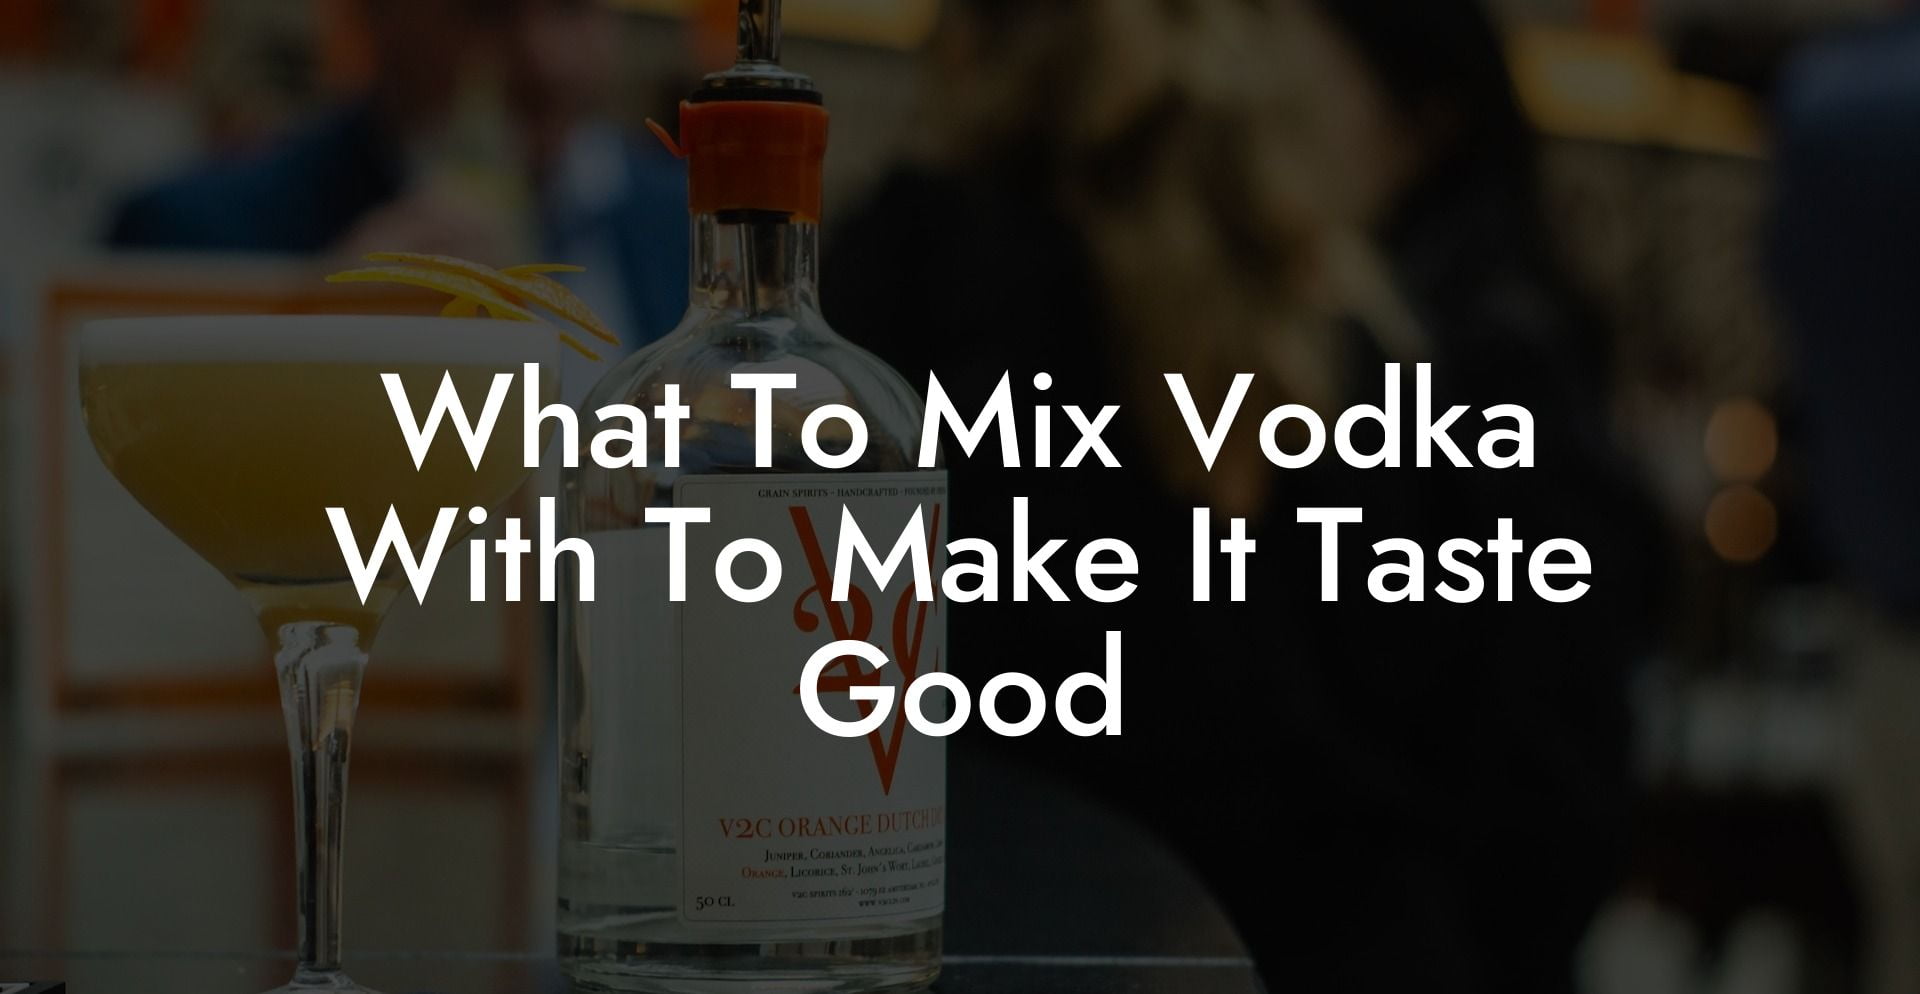 What To Mix Vodka With To Make It Taste Good